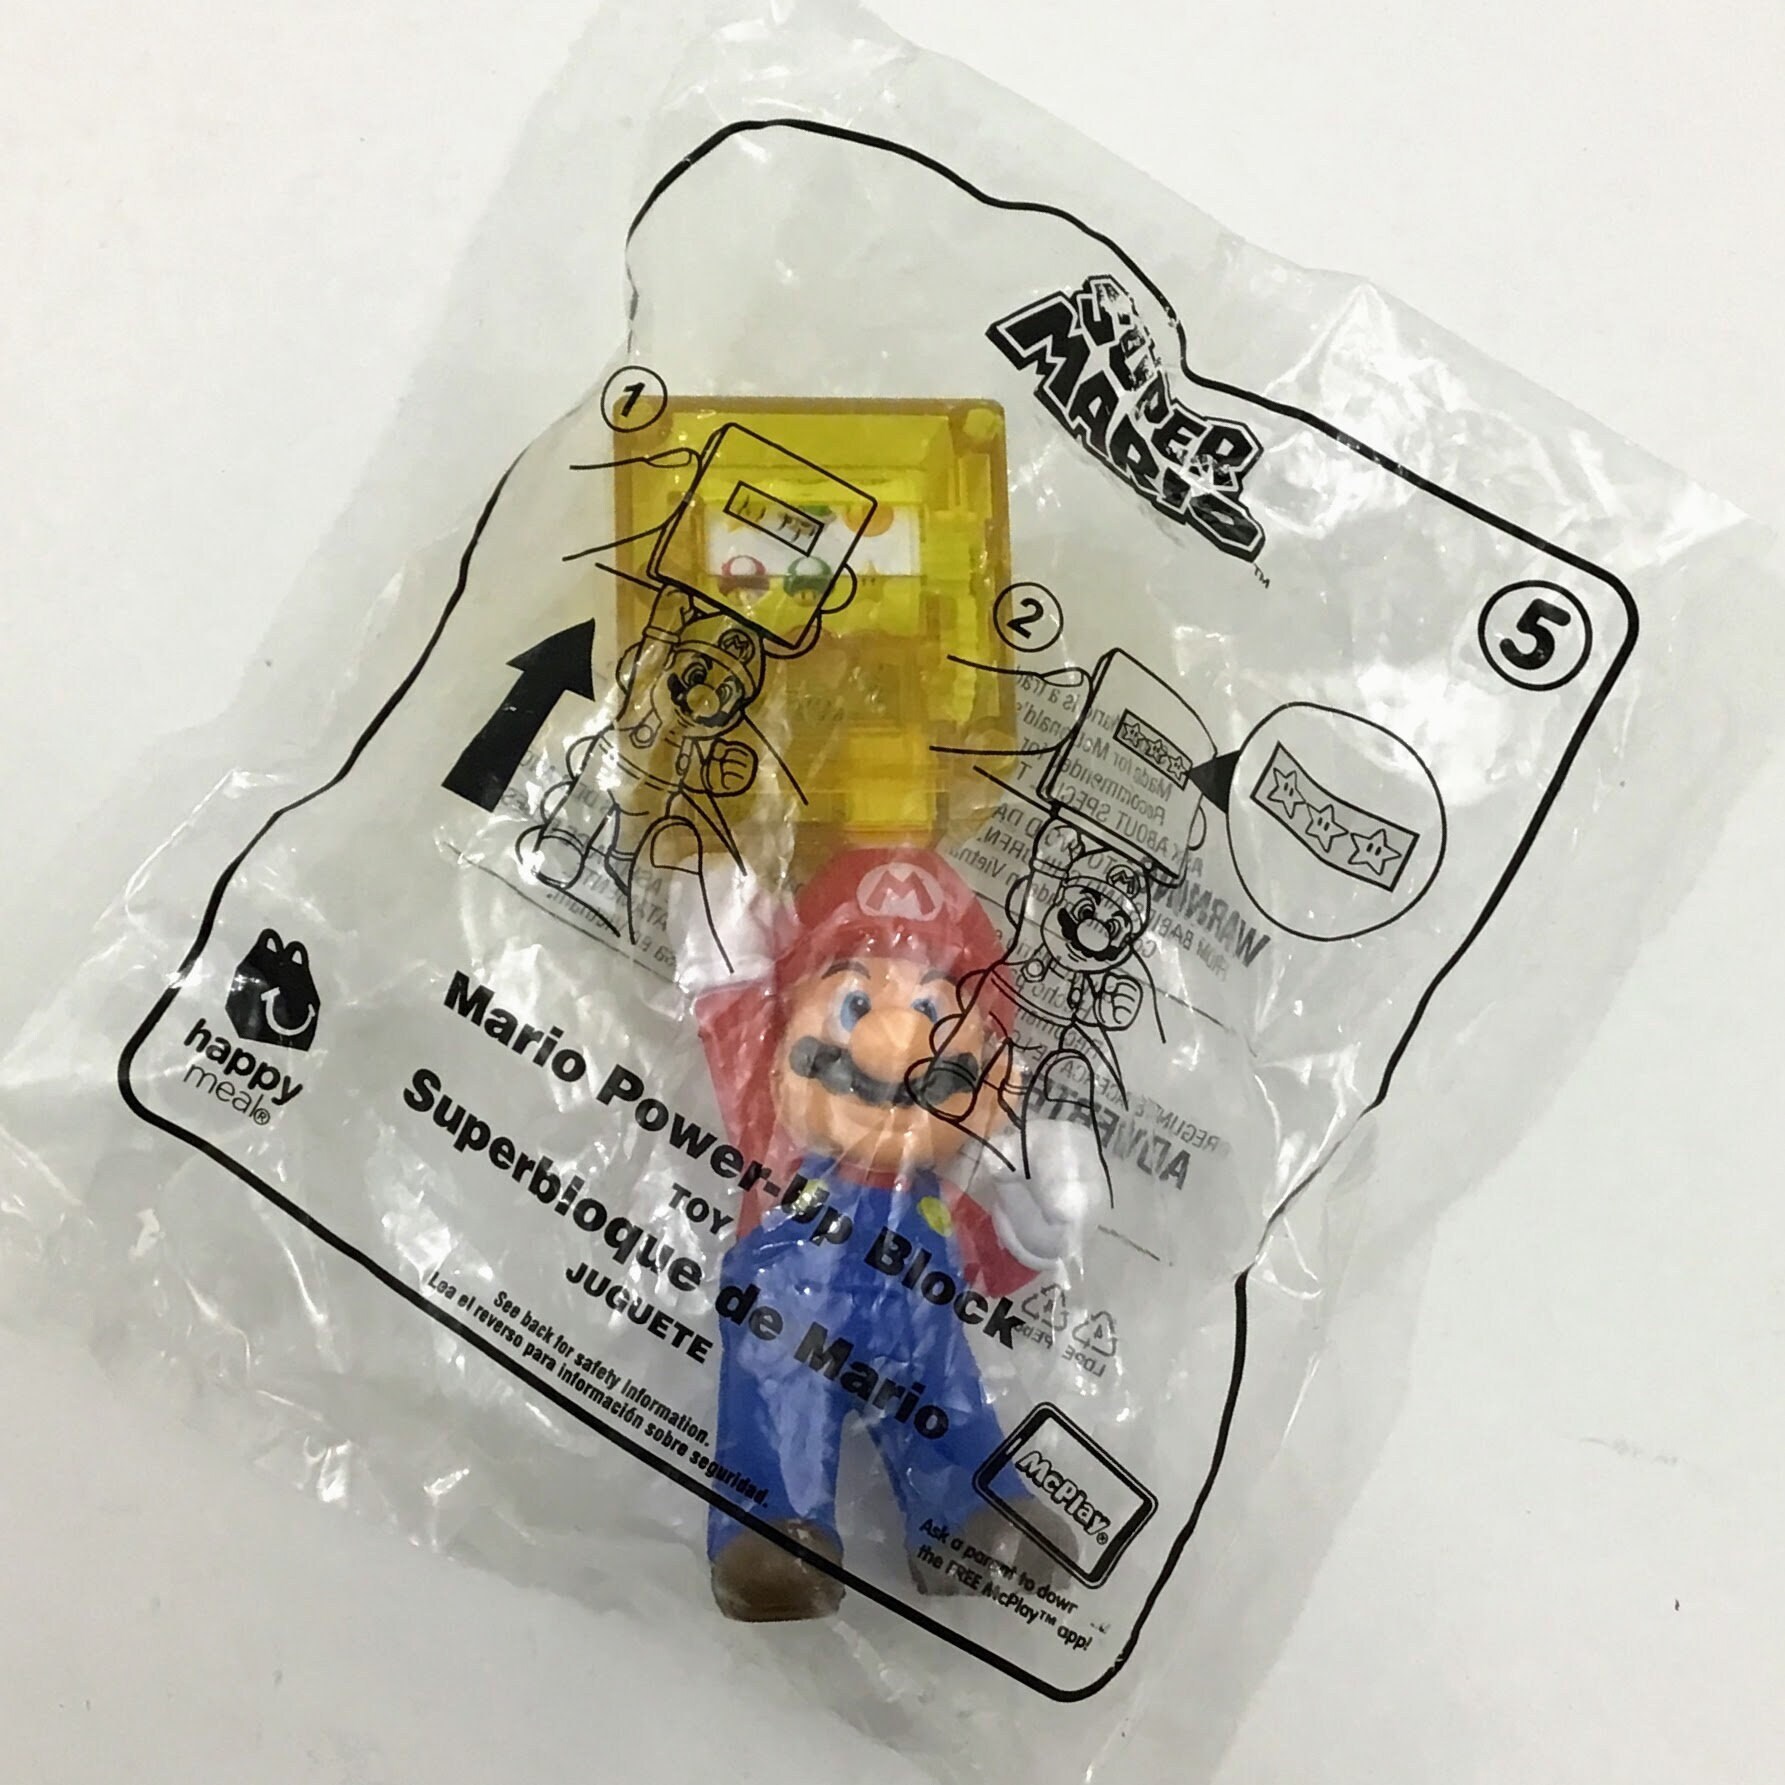 Details about   NEW McDonalds Happy Meal Toy SUPER MARIO BROS Power Up Block Boys 2019 